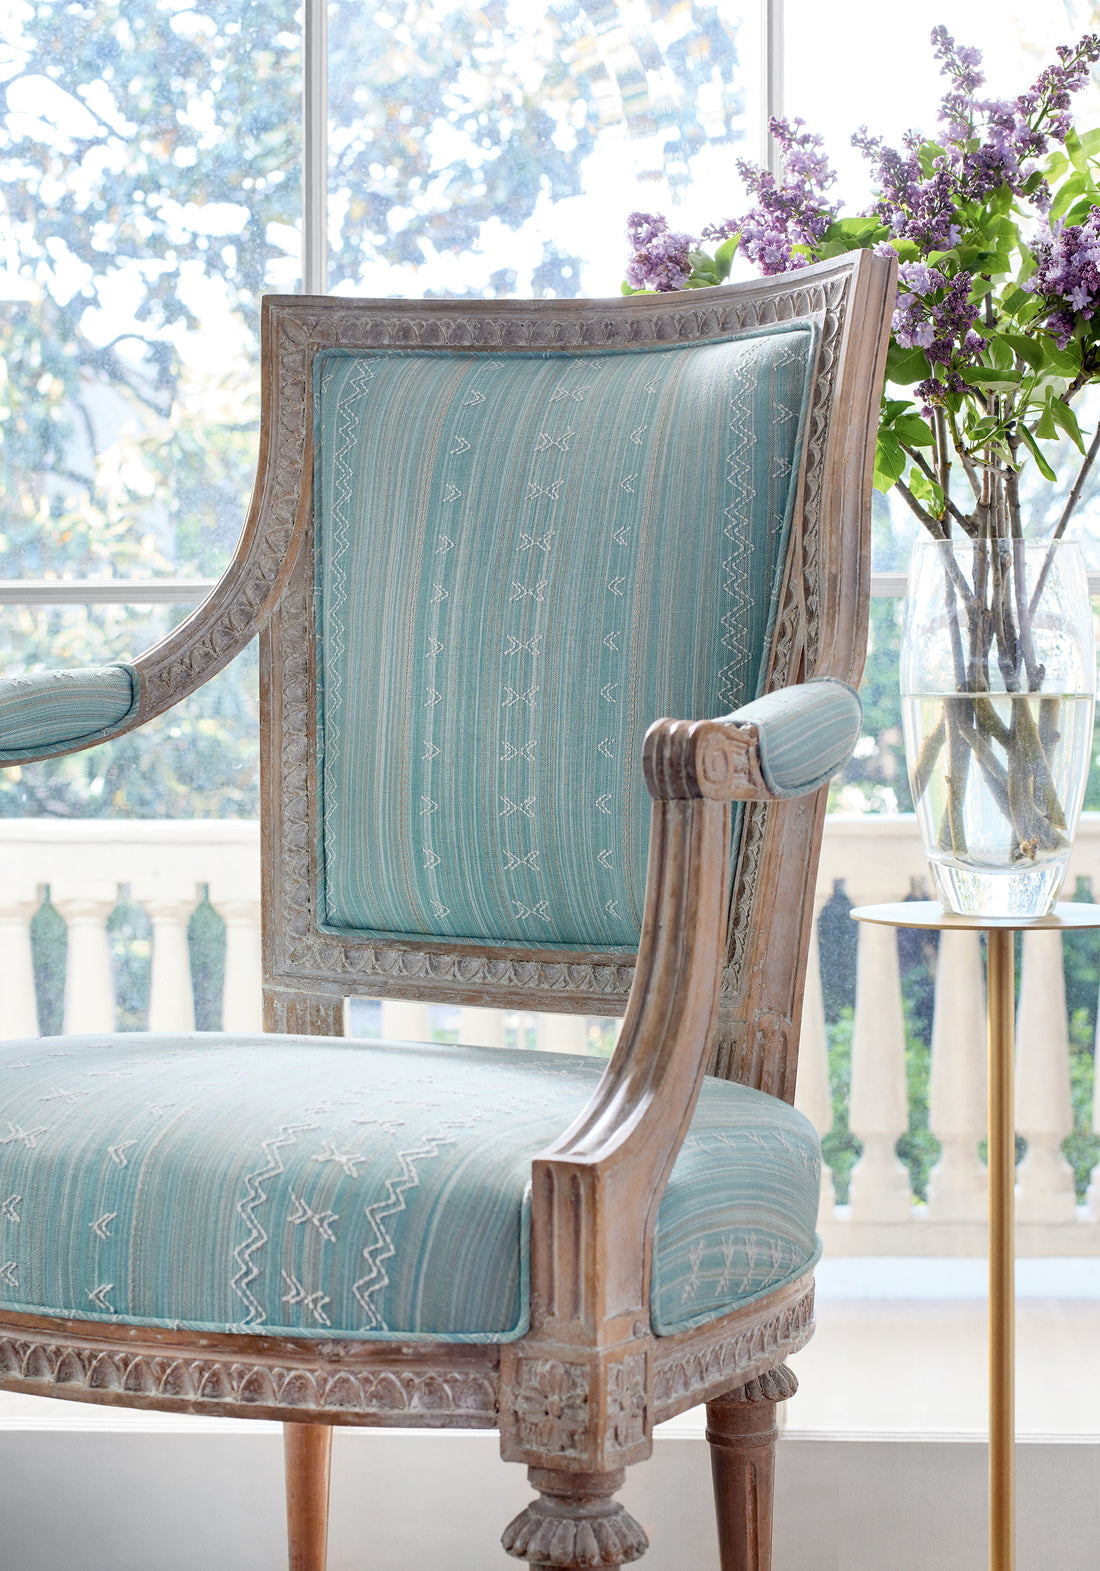 Dining chair featuring Charter Stripe Embroidery fabric in seaglass color - pattern number W736455 - by Thibaut in the Indienne collection